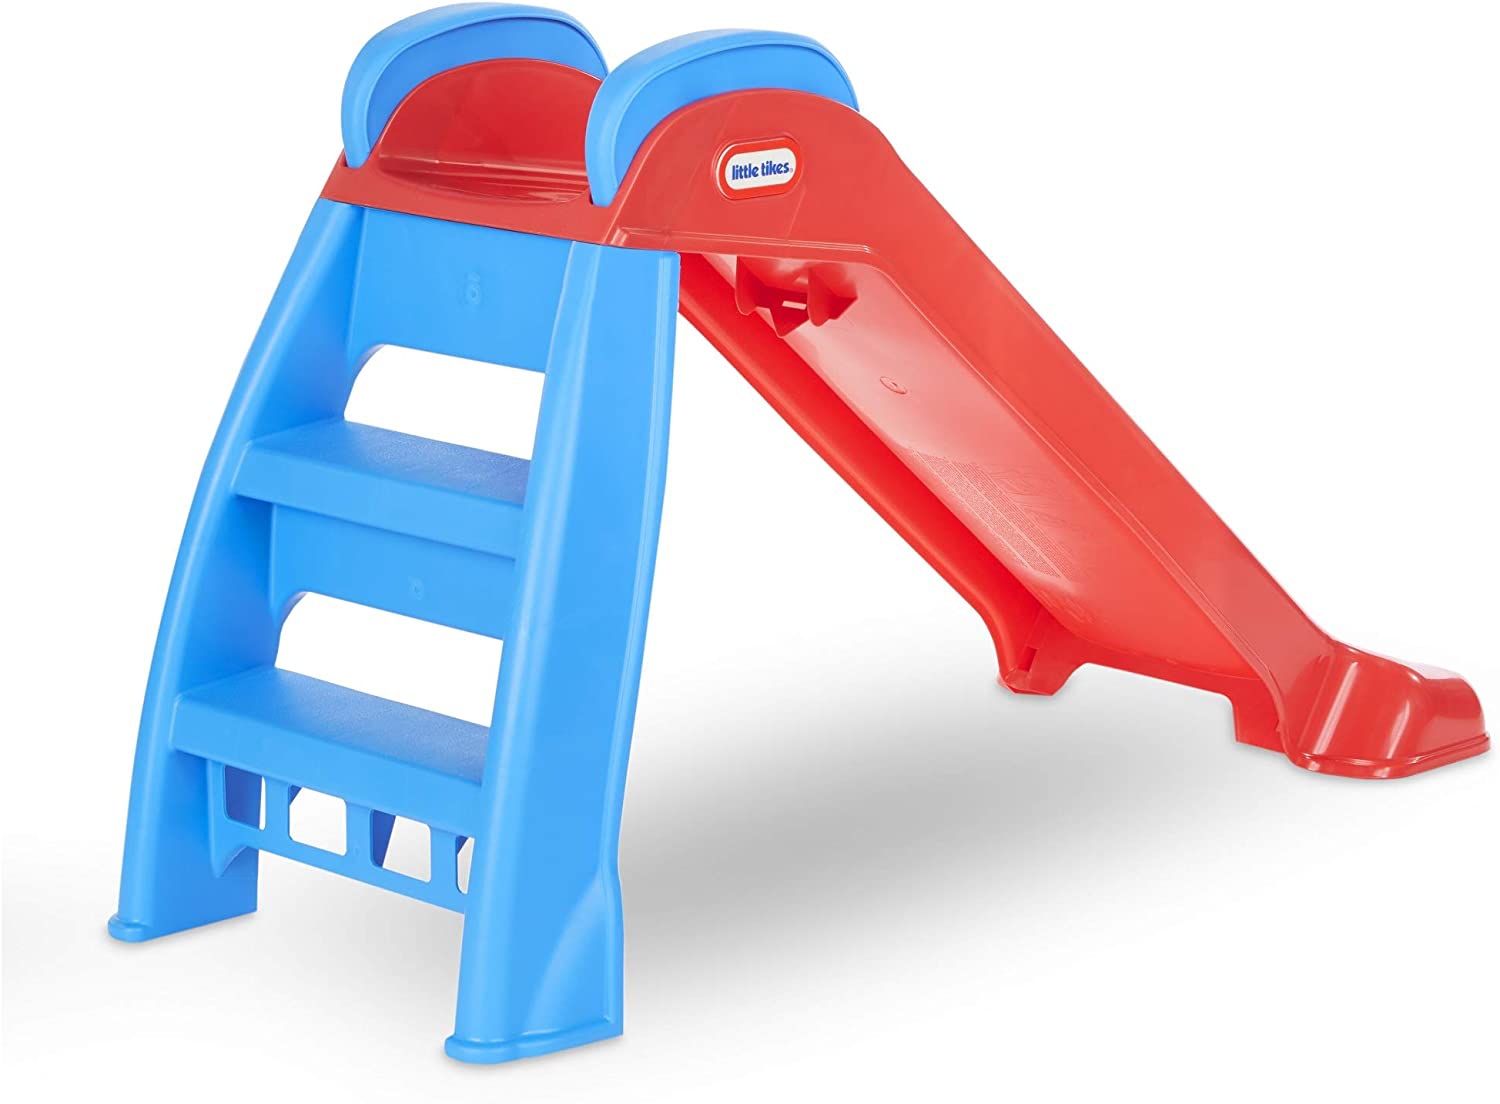 Little Tikes First Slide Toddler Slide, Easy Set Up Playset for Indoor Outdoor Backyard, Easy to Store, Safe Toy for Toddler, Slip And Slide For Kids (Red/Blue)